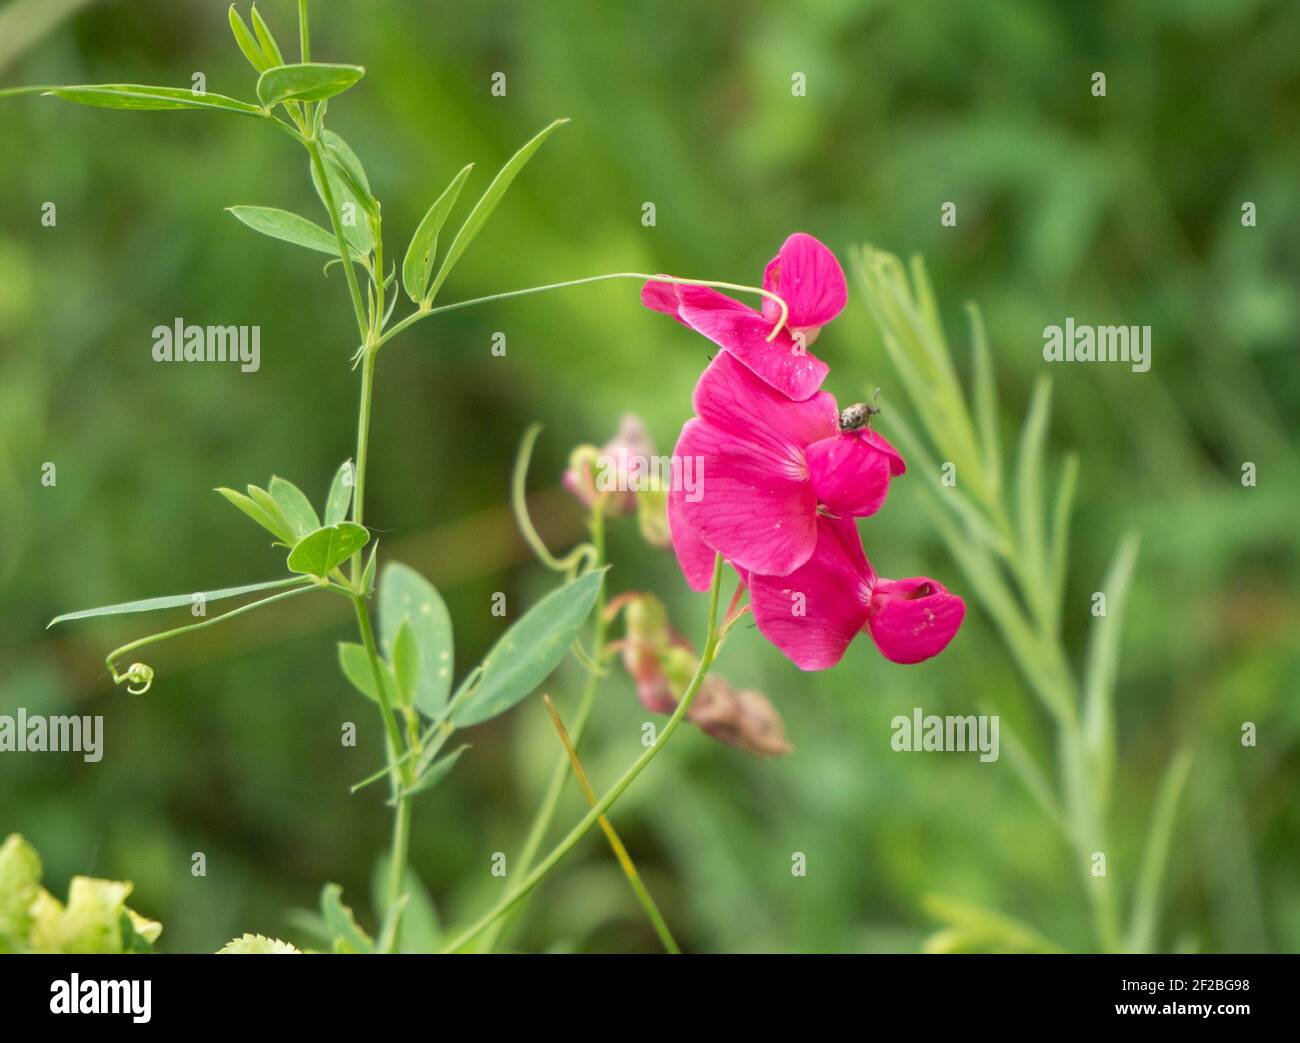 Pink subtle bean plant flower with a thin stalk and antennae for wrapping around other plants. Stock Photo